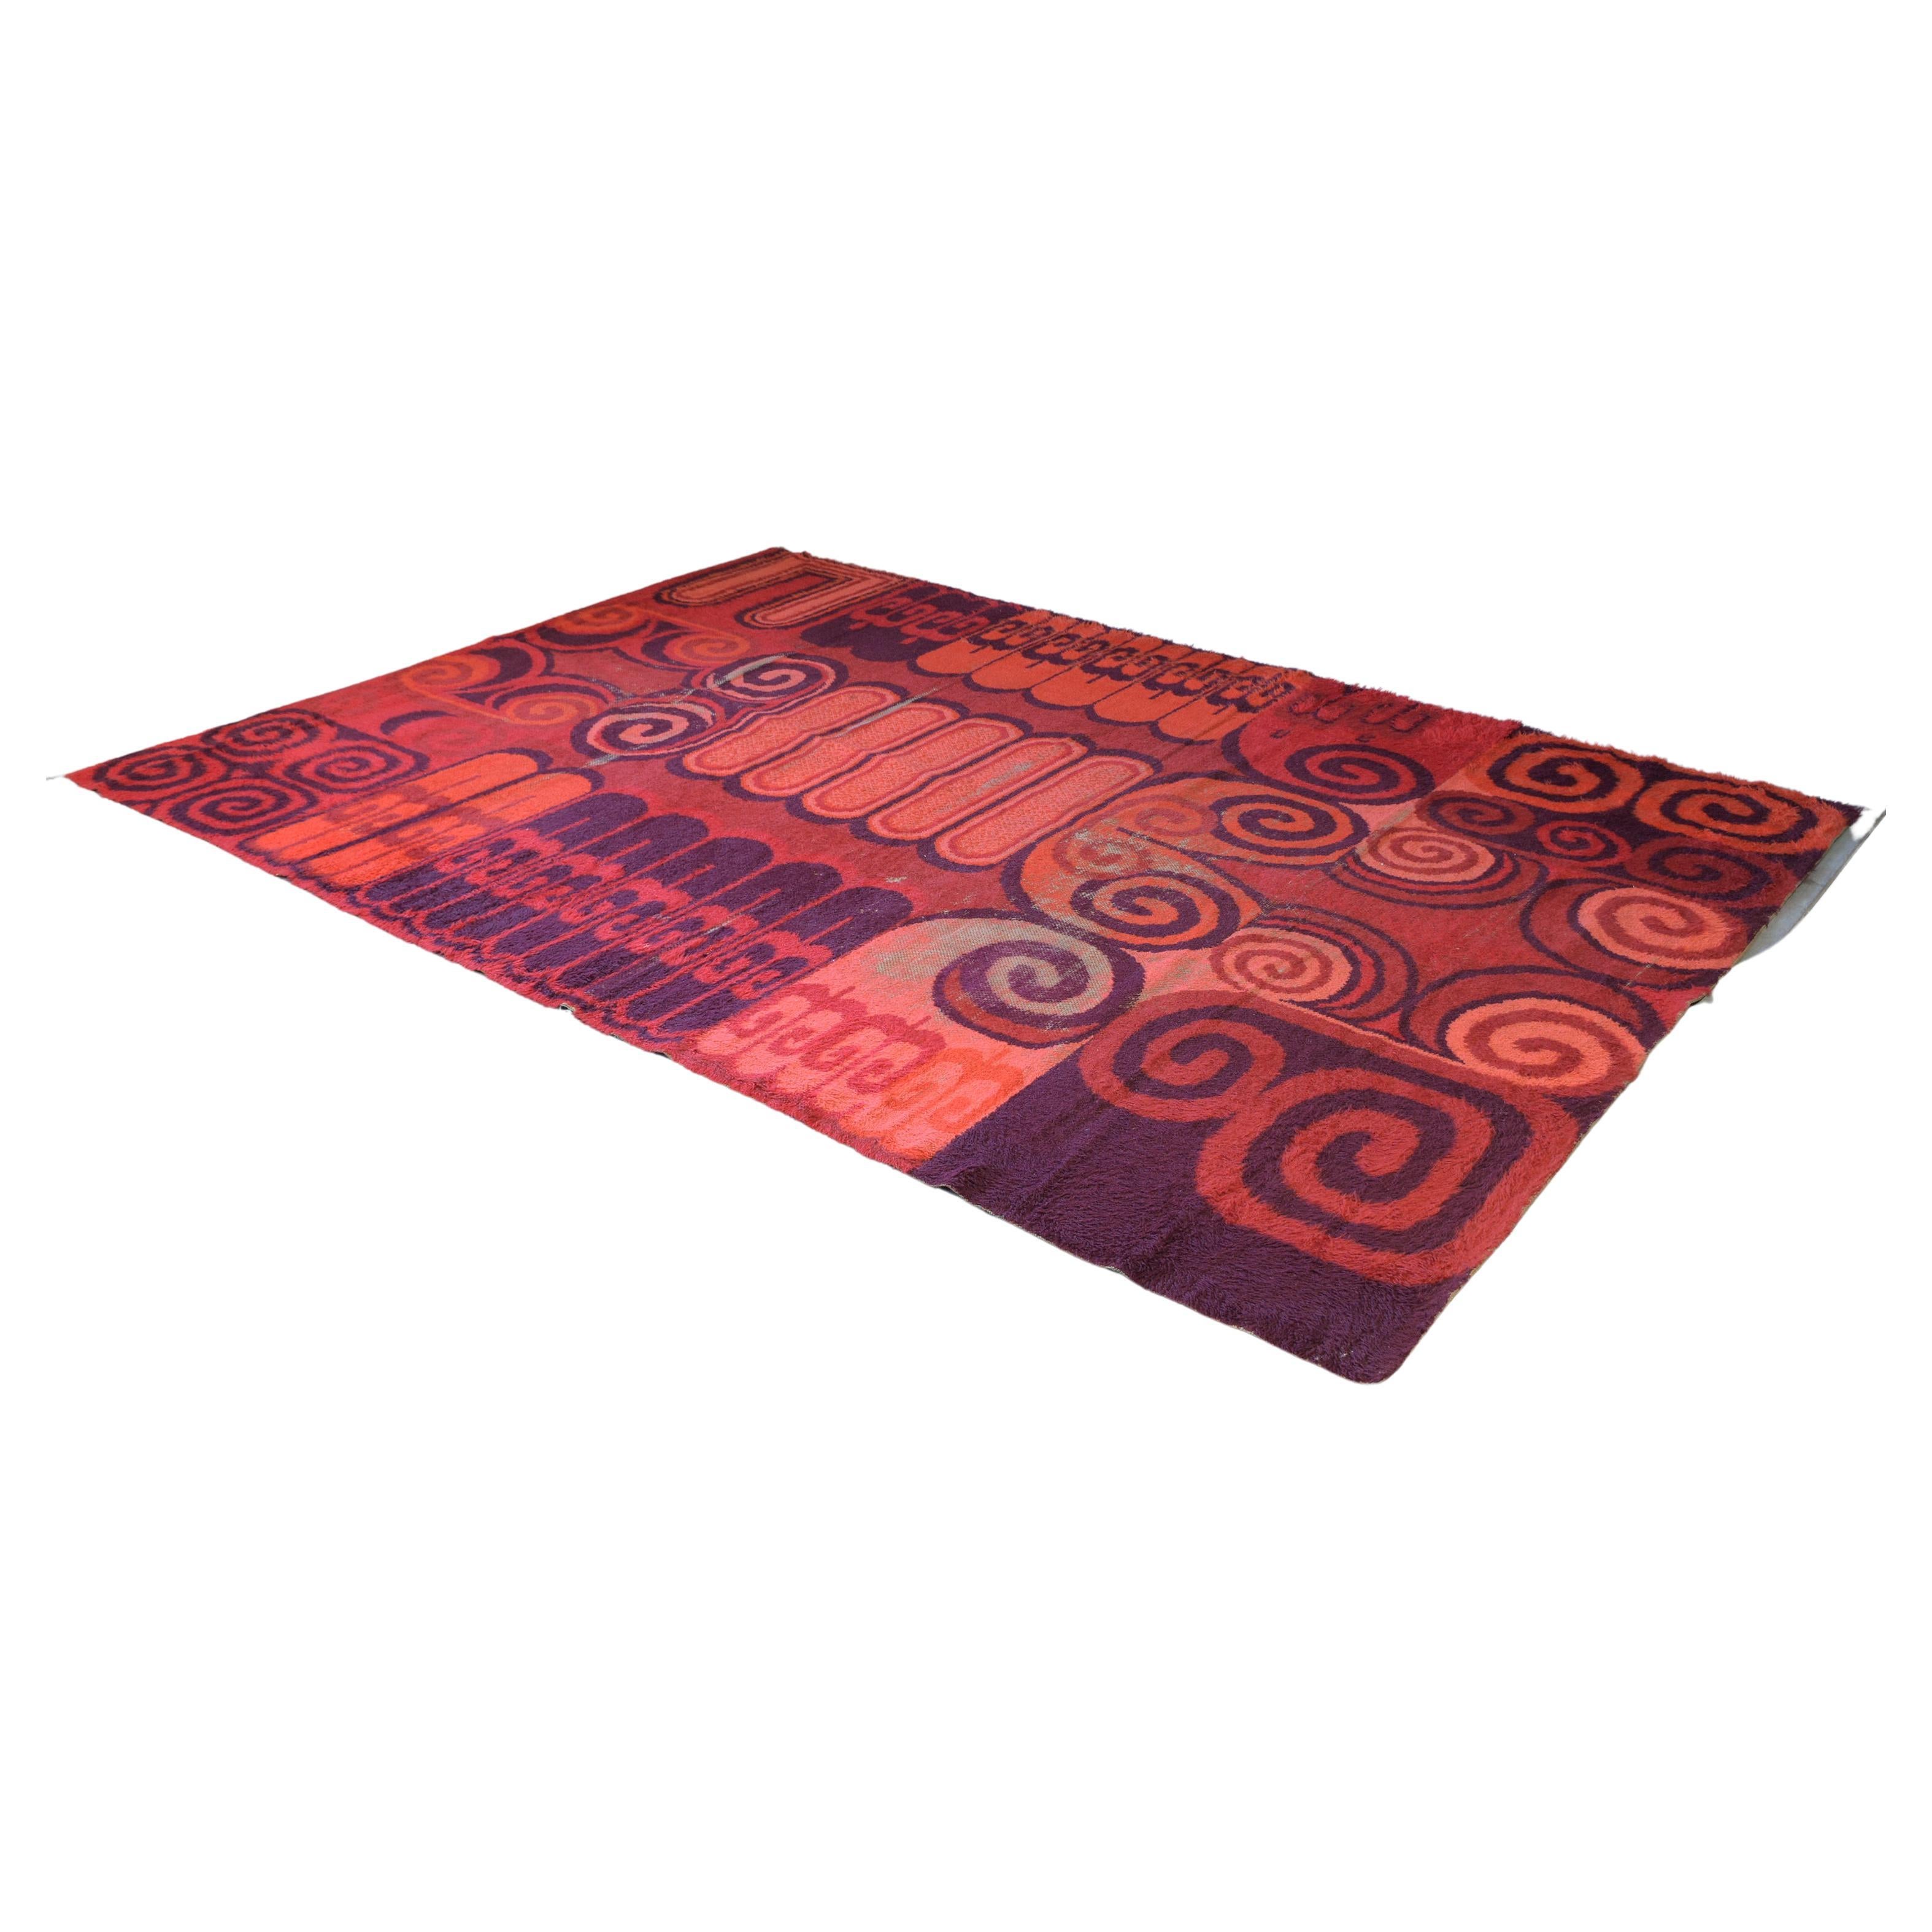 This vibrant Scandinavian Fire Pattern Shag rug by Ege Rya has a thick wool pile, with vibrant colors in red, orange, pink, and brown colors. This vintage large carpet is sure to add some welcomed color to any inspired sophisticated home decor for